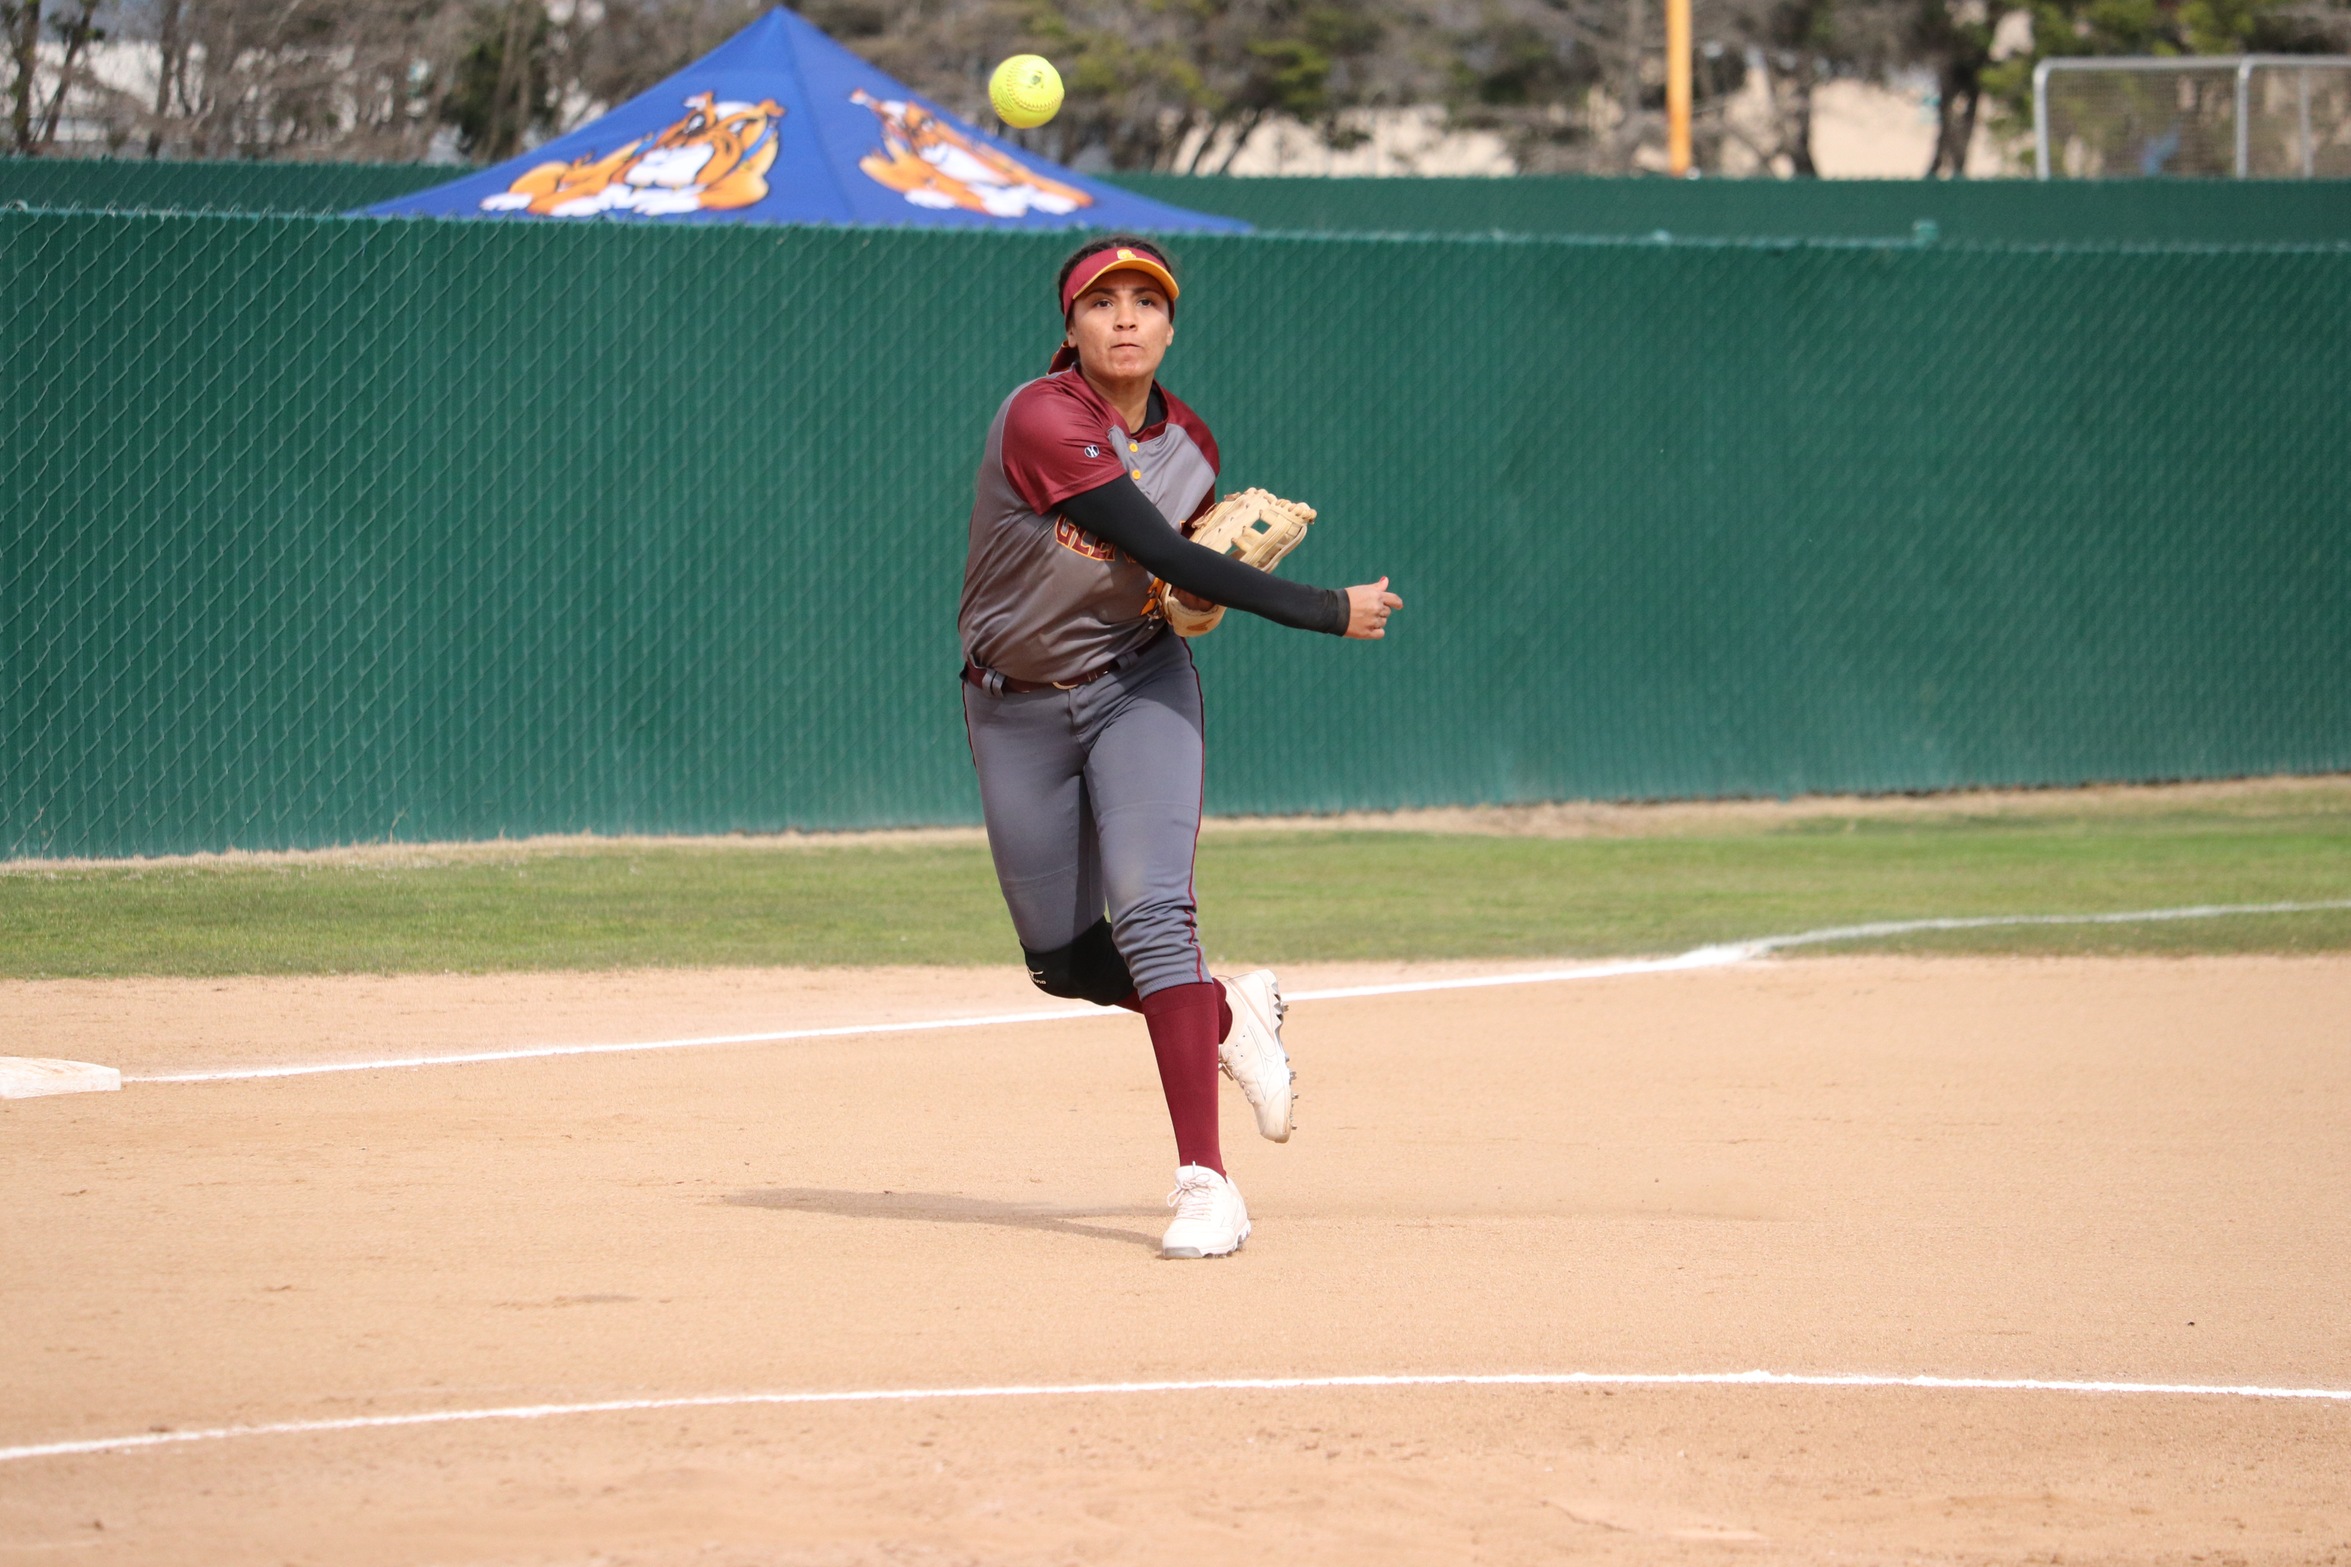 GCC Softball dominates on offense and on the mound in 8-4 win over L.A. Valley March 31